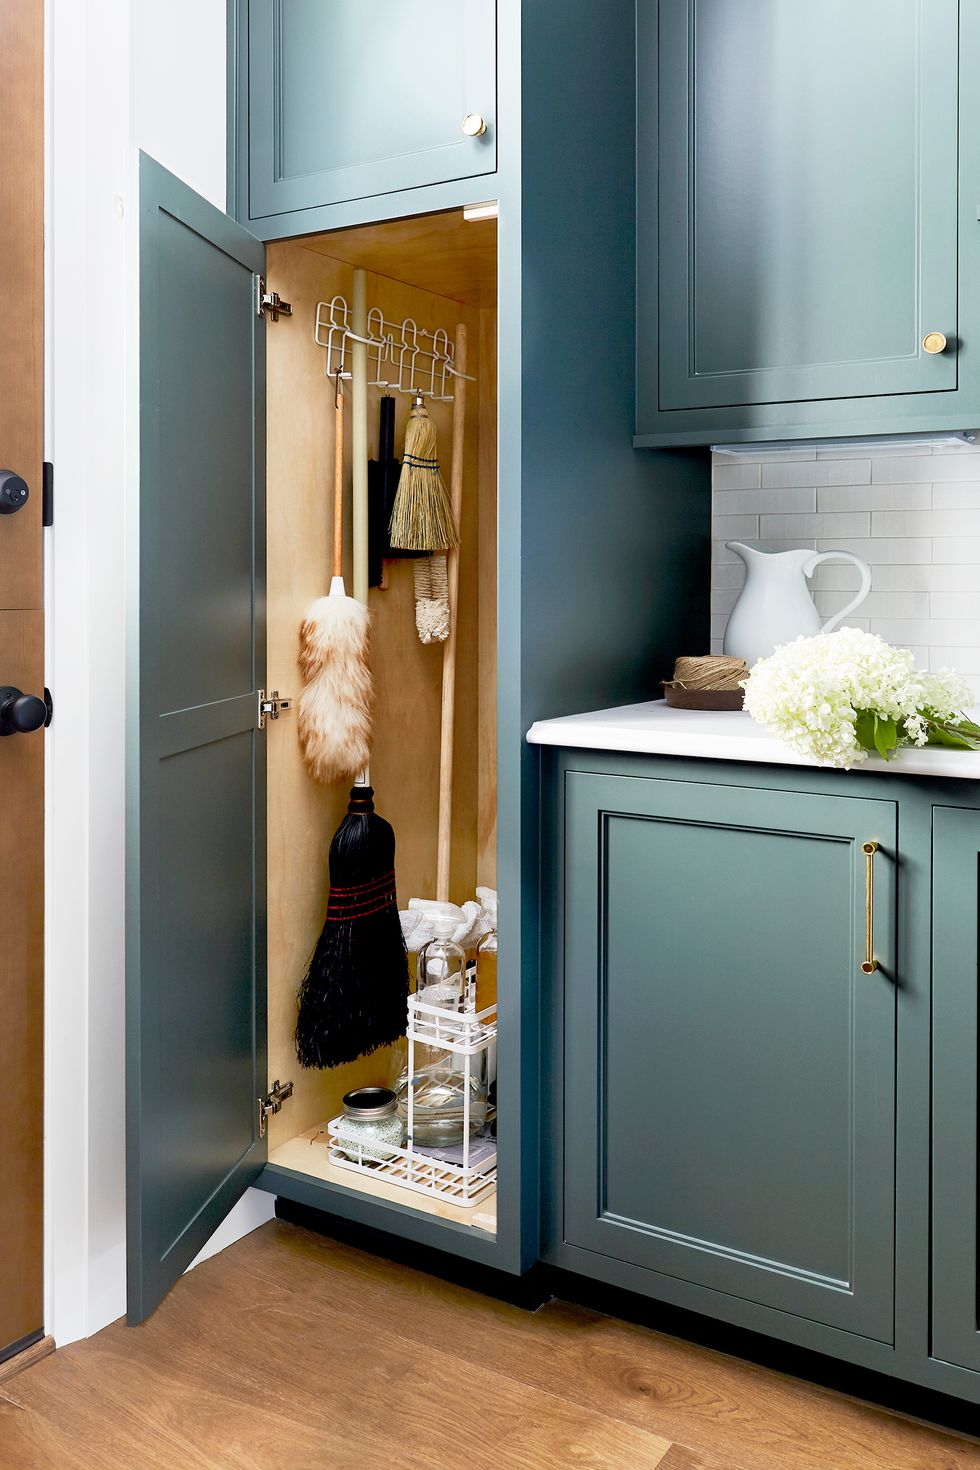 60 Clever Cabinet Organization Tips To